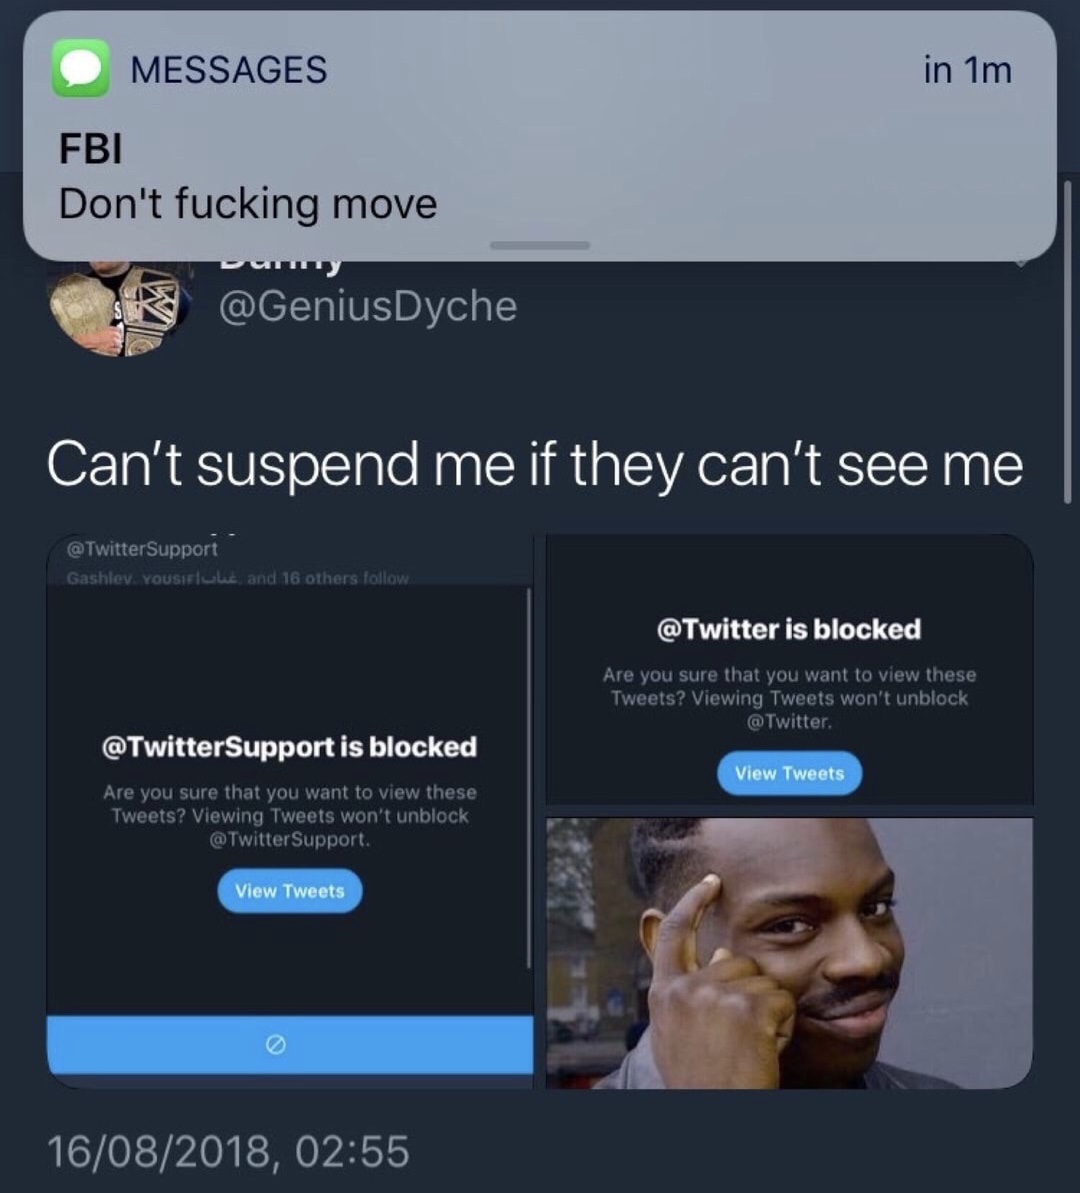 memes - dont fuckung moce meme - in 1m Messages Fbi Don't fucking move Can't suspend me if they can't see me Gashlev. Yousif ulaz and 16 others is blocked Are you sure that you want to view these Tweets? Viewing Tweets won't unblock is blocked View Tweets